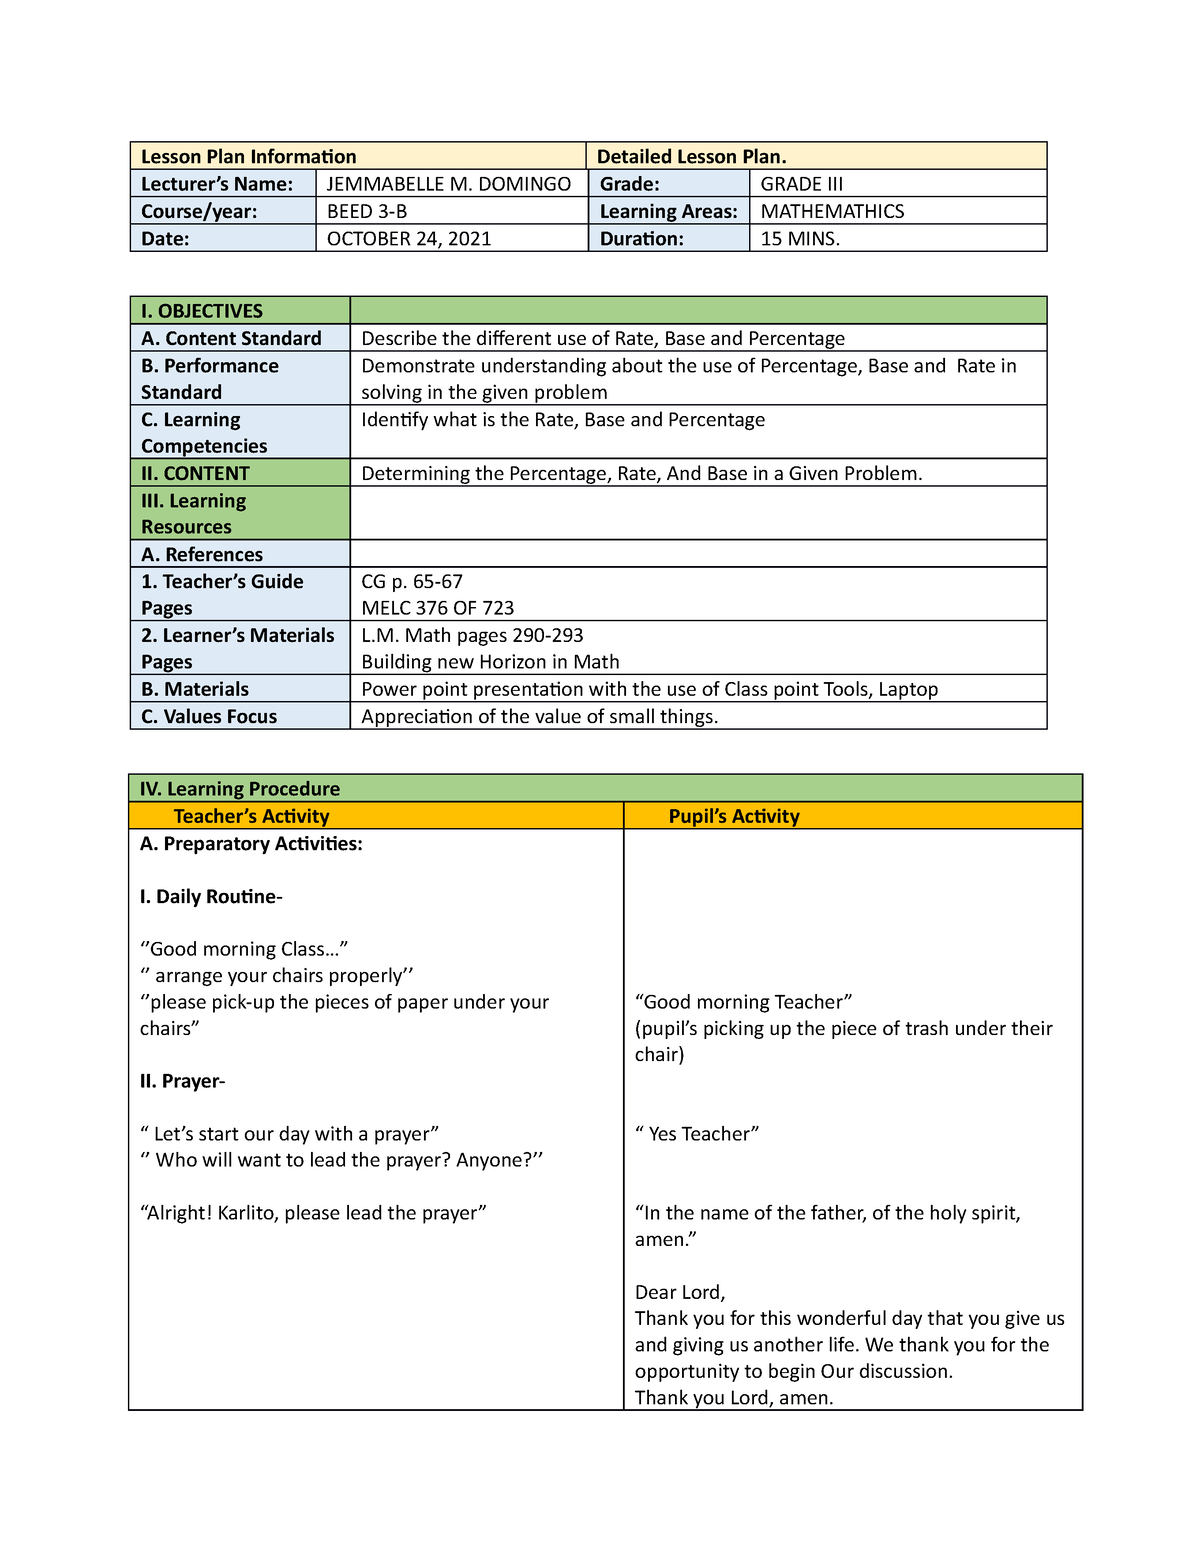 sample-lesson-plan-detailed-in-math-lesson-plan-information-detailed